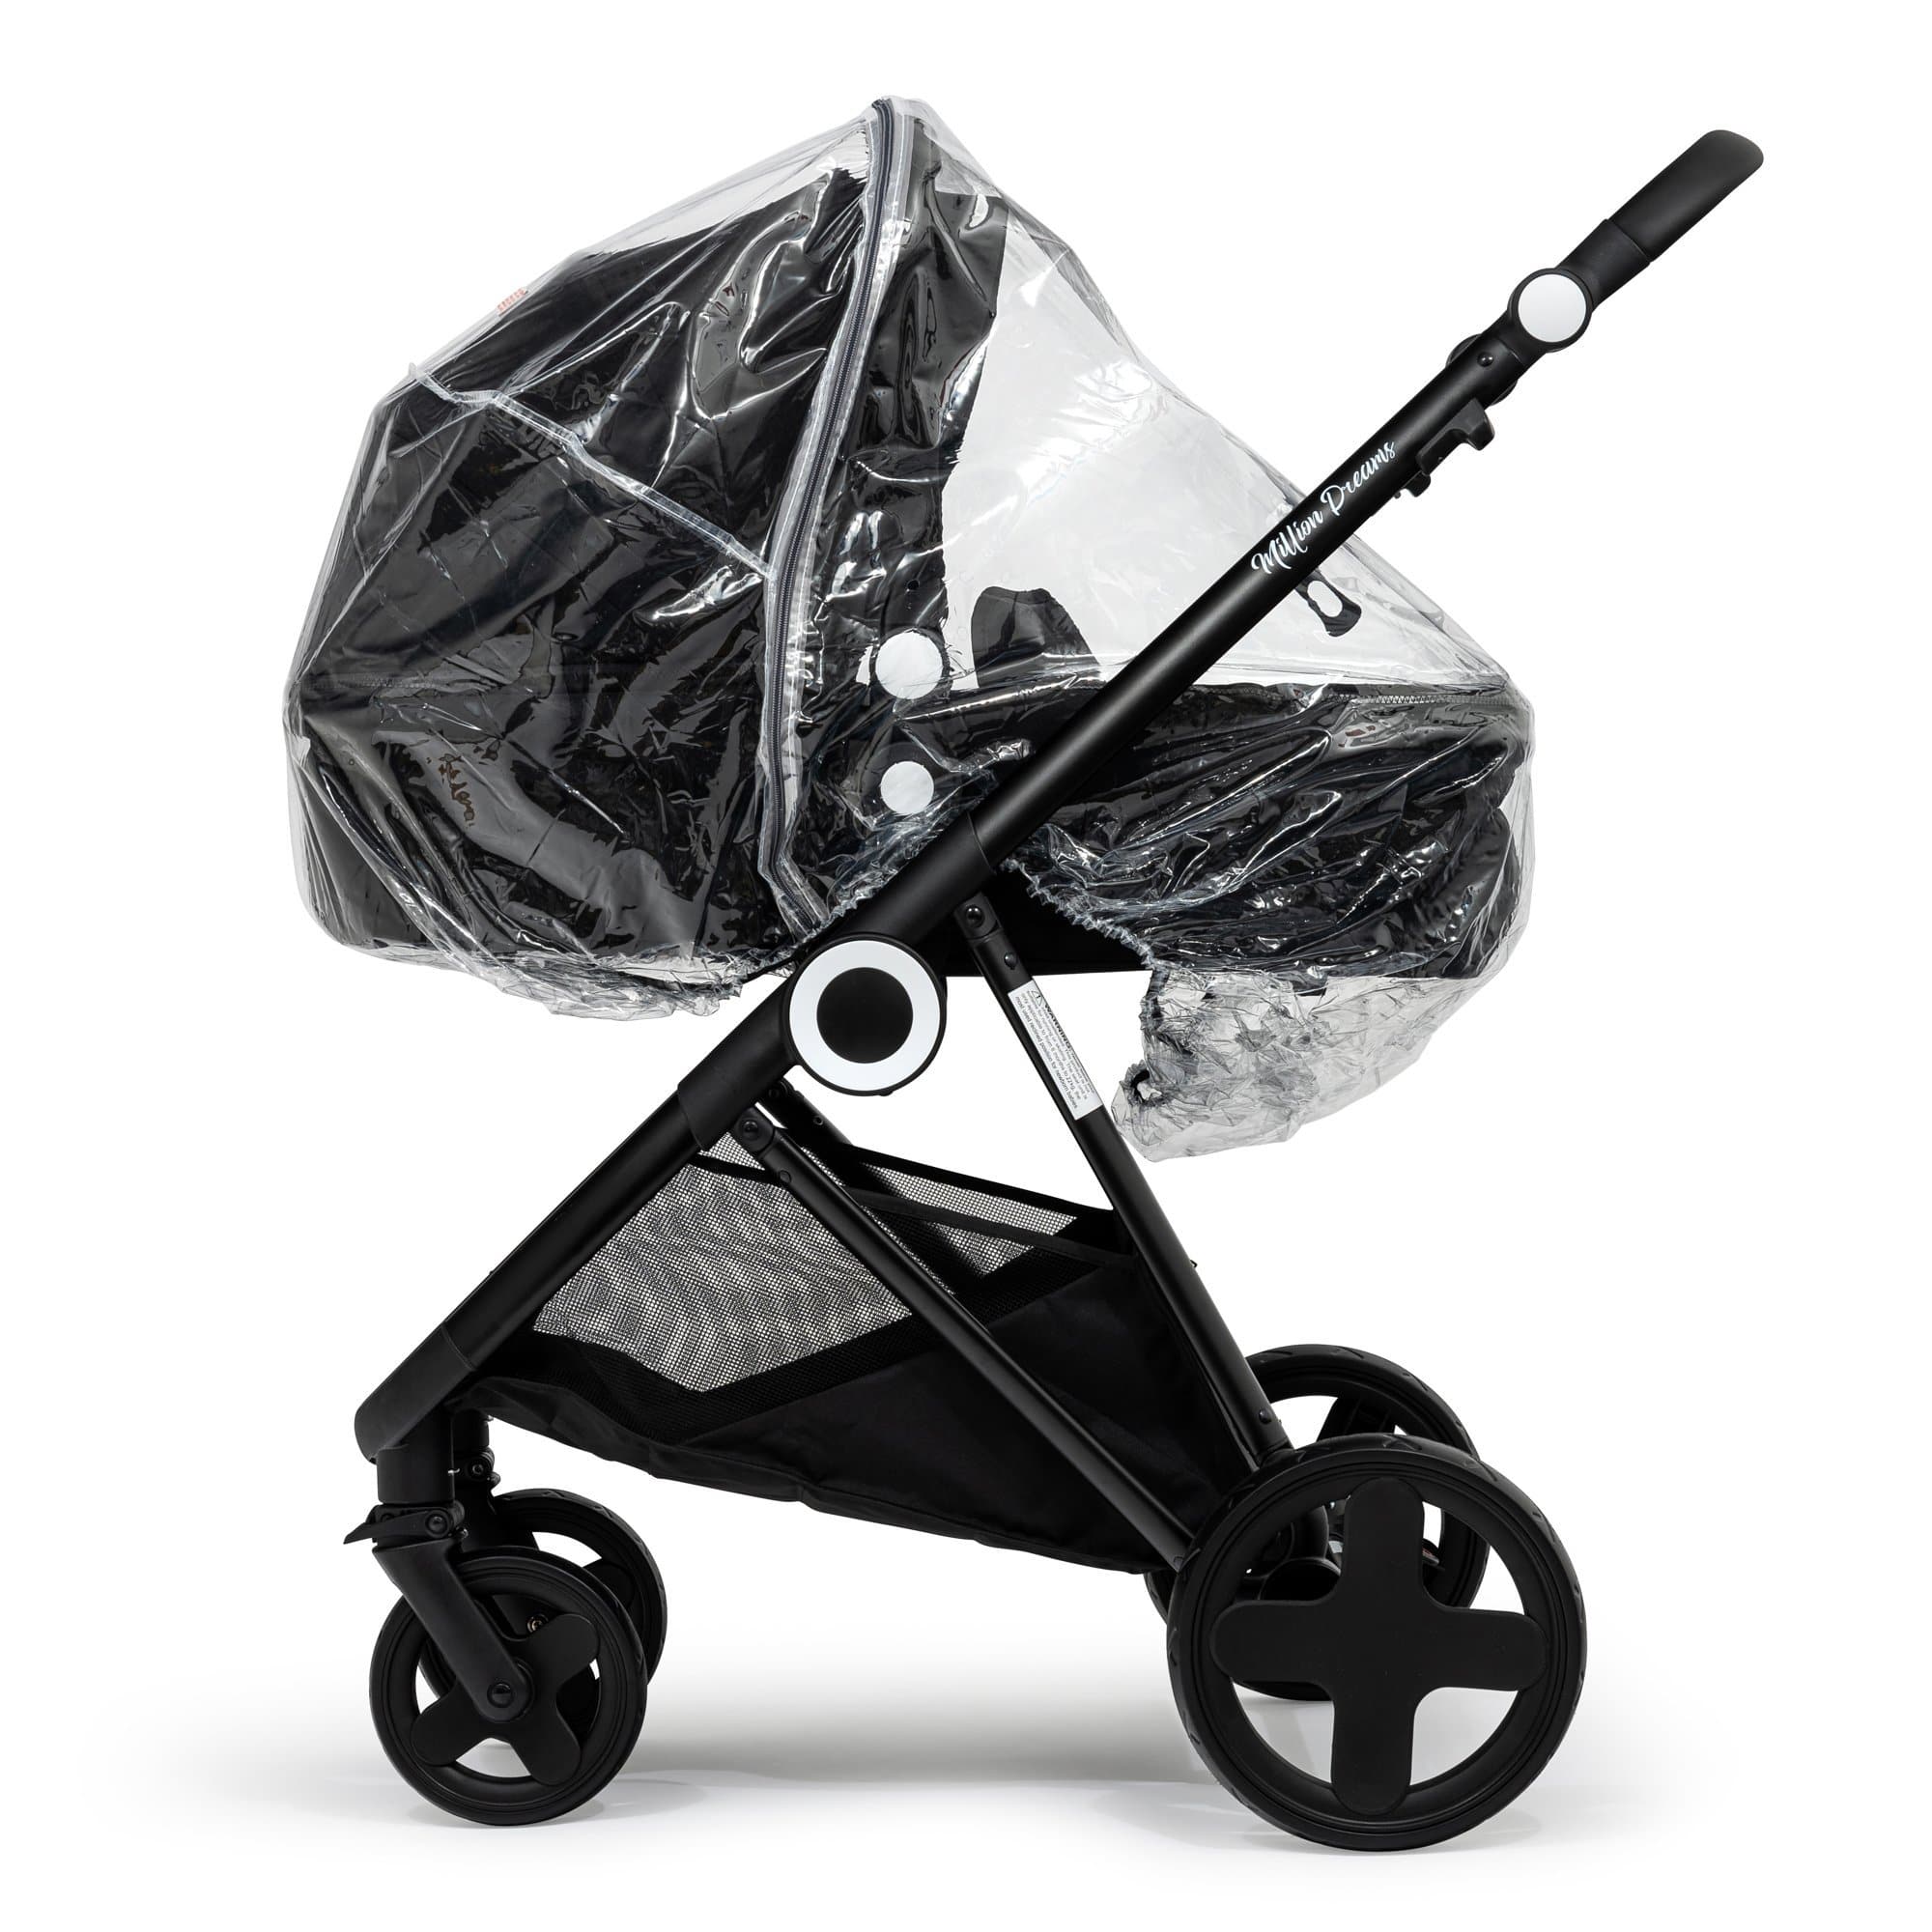 2 in 1 Rain Cover Compatible with Gesslein - Fits All Models - For Your Little One